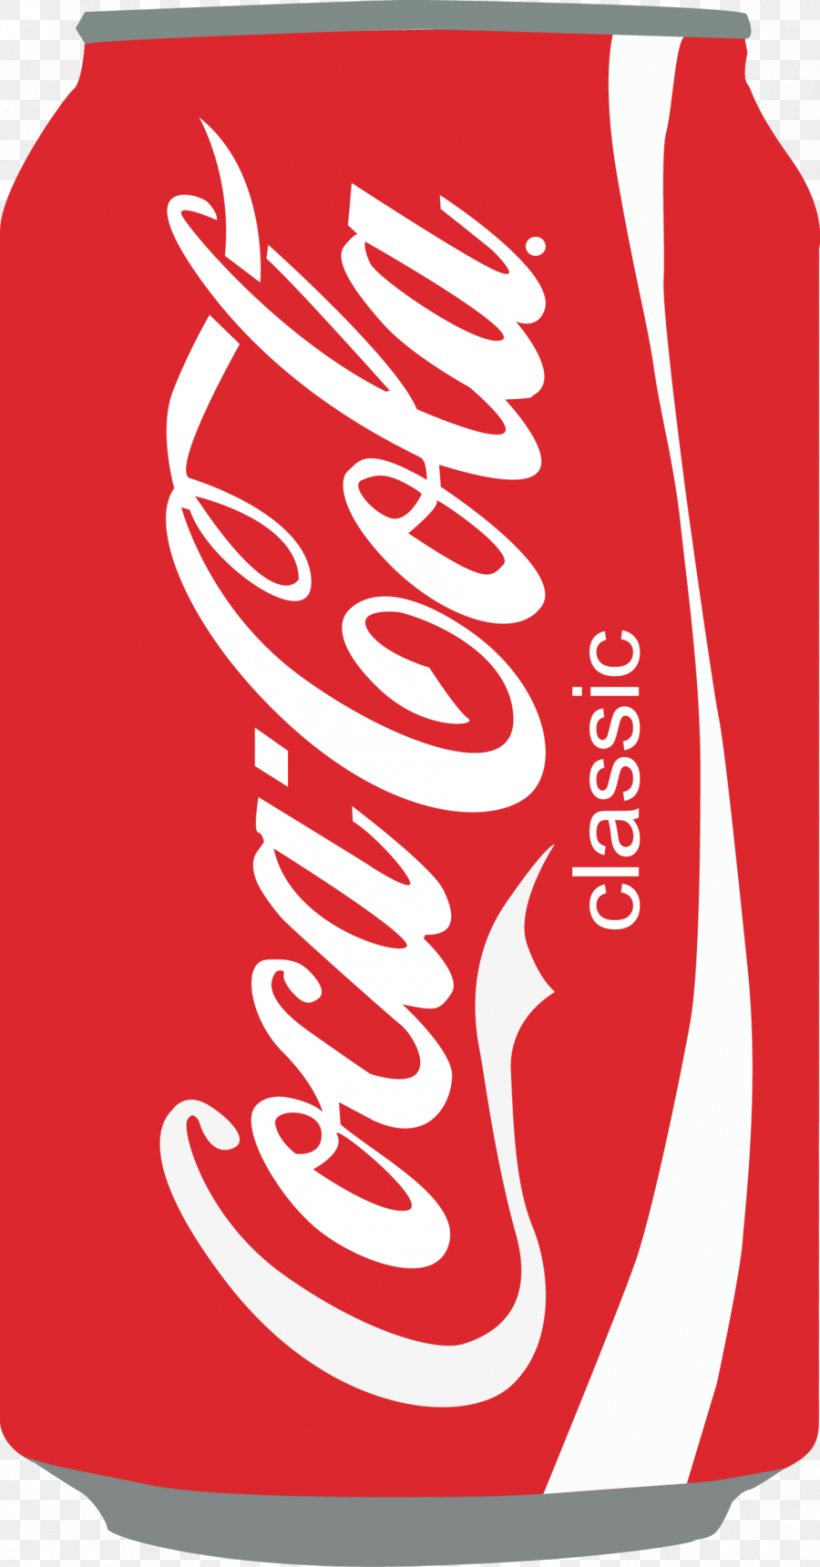 Coca Cola Drawing by bendesign on DeviantArt